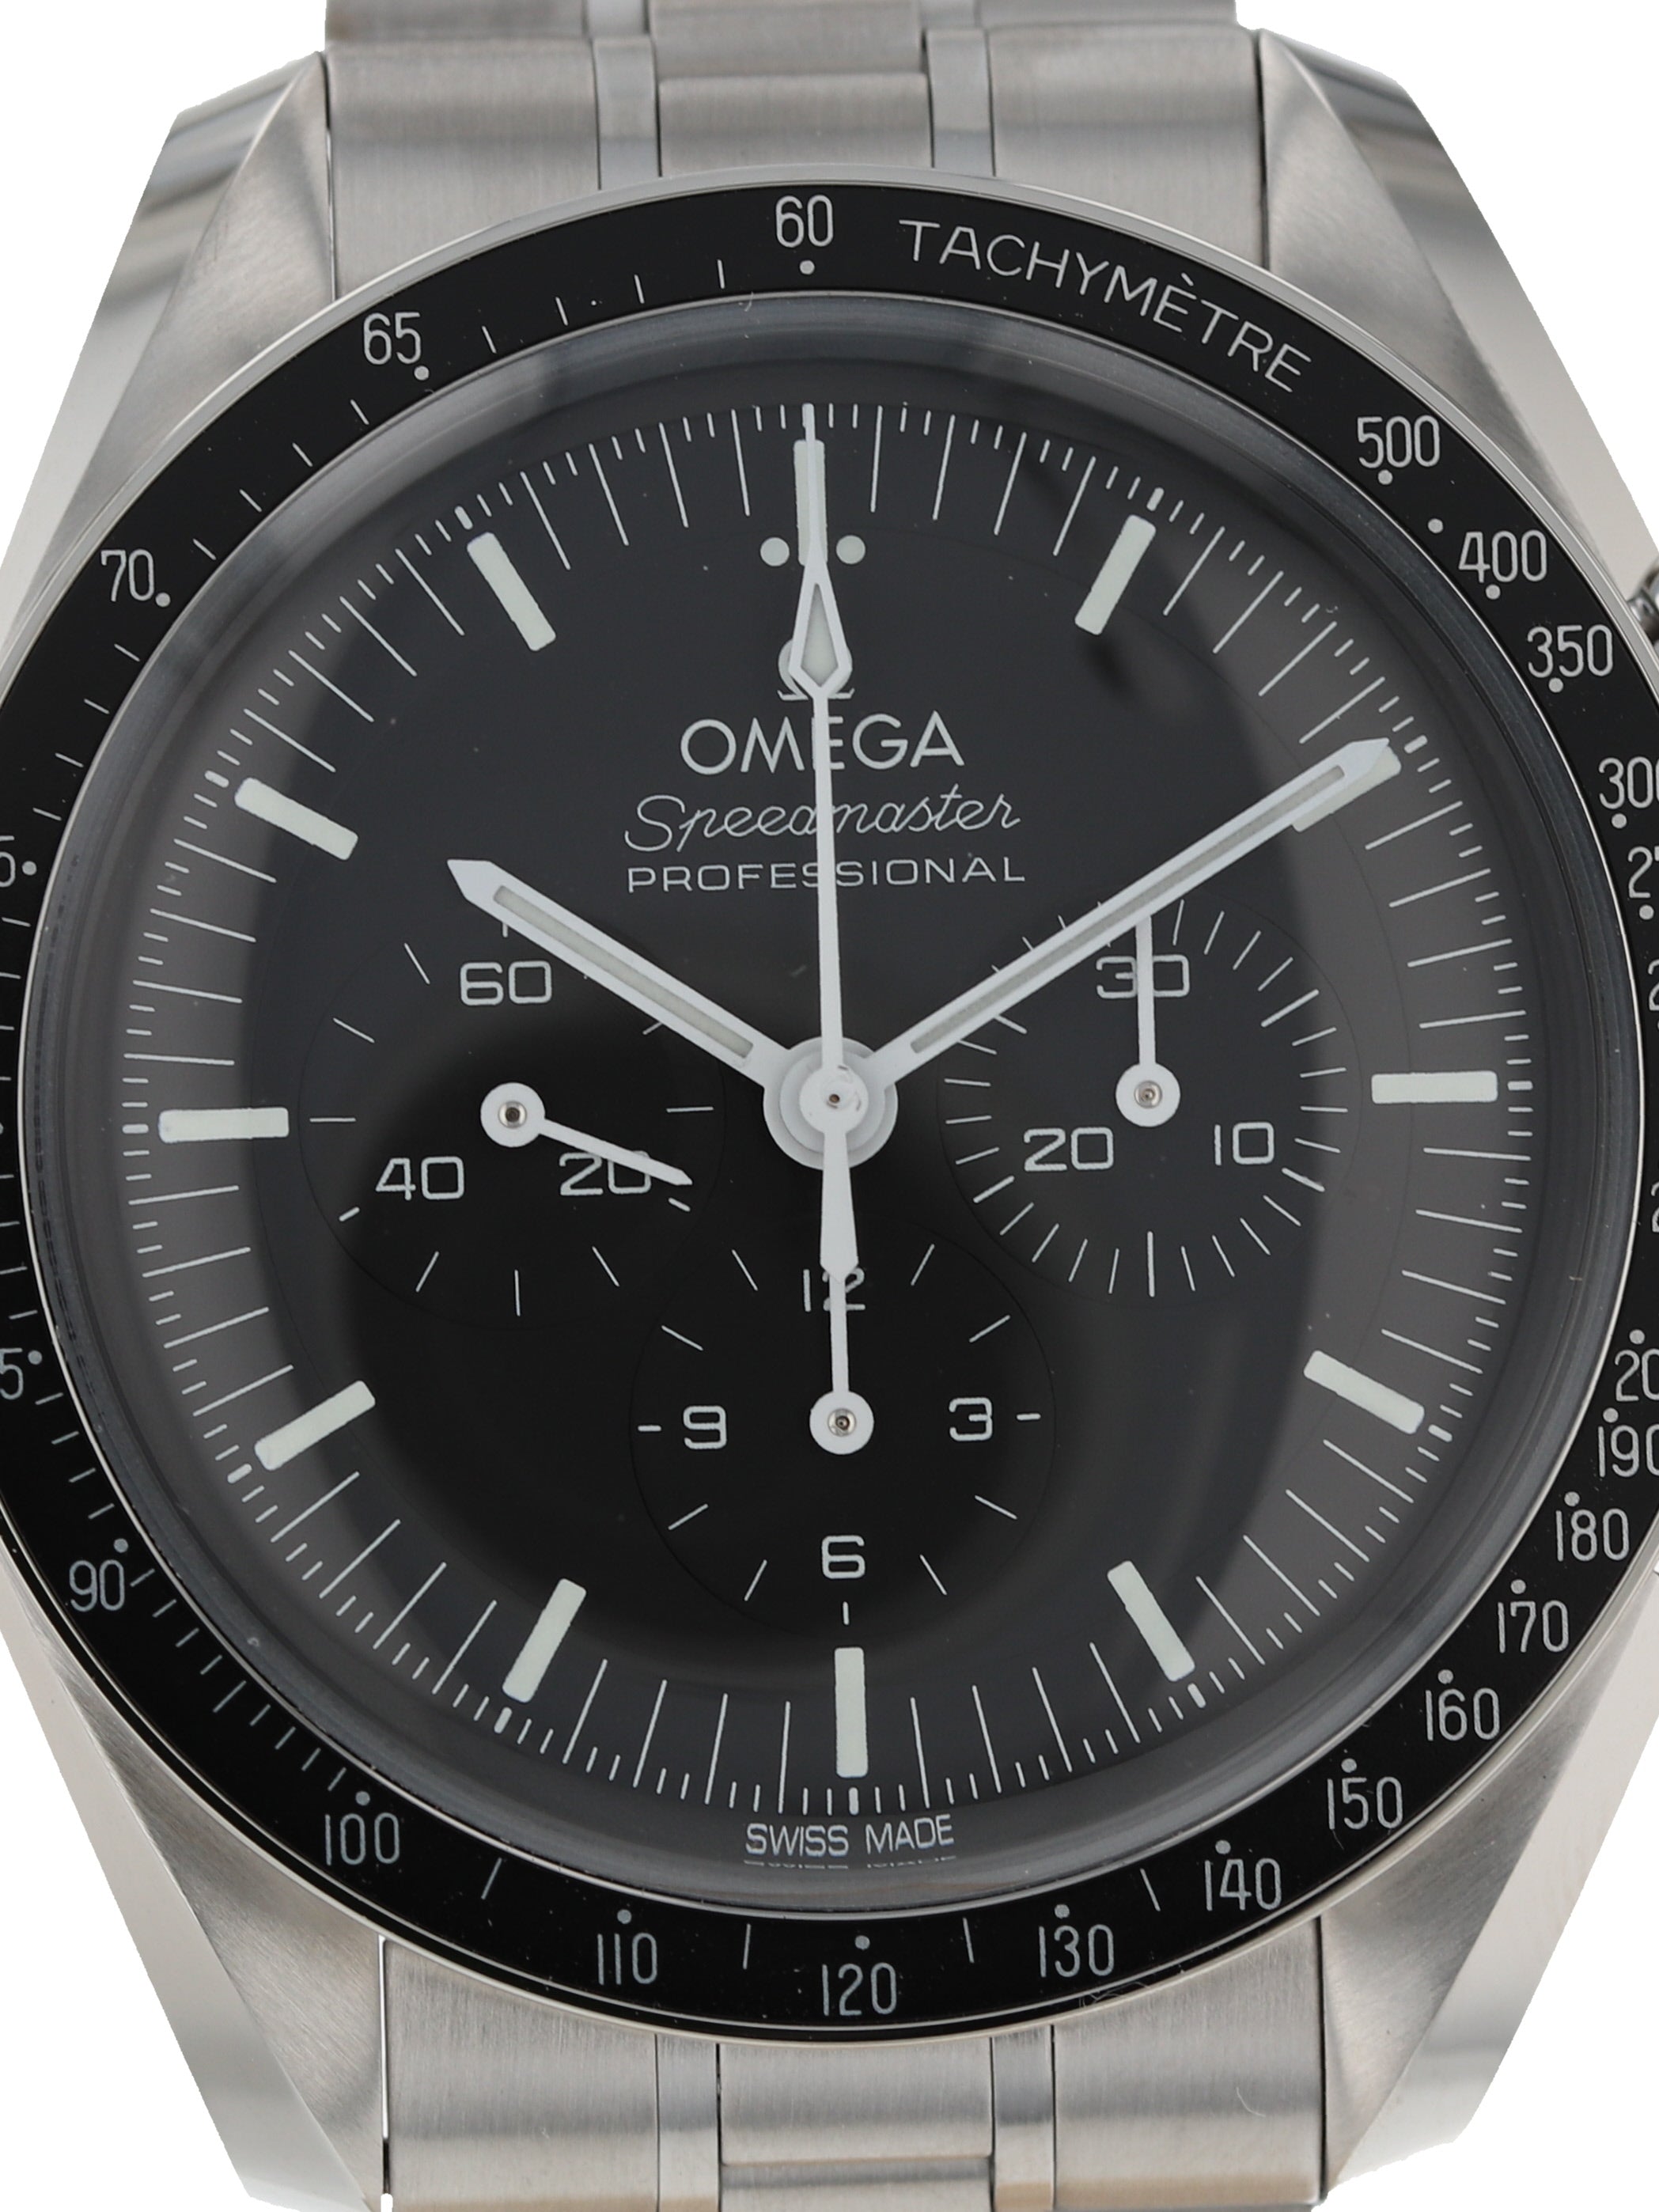 Omega Speedmaster Moonwatch Professional Master Chronograph  310.30.42.50.01.001 - Exquisite Timepieces